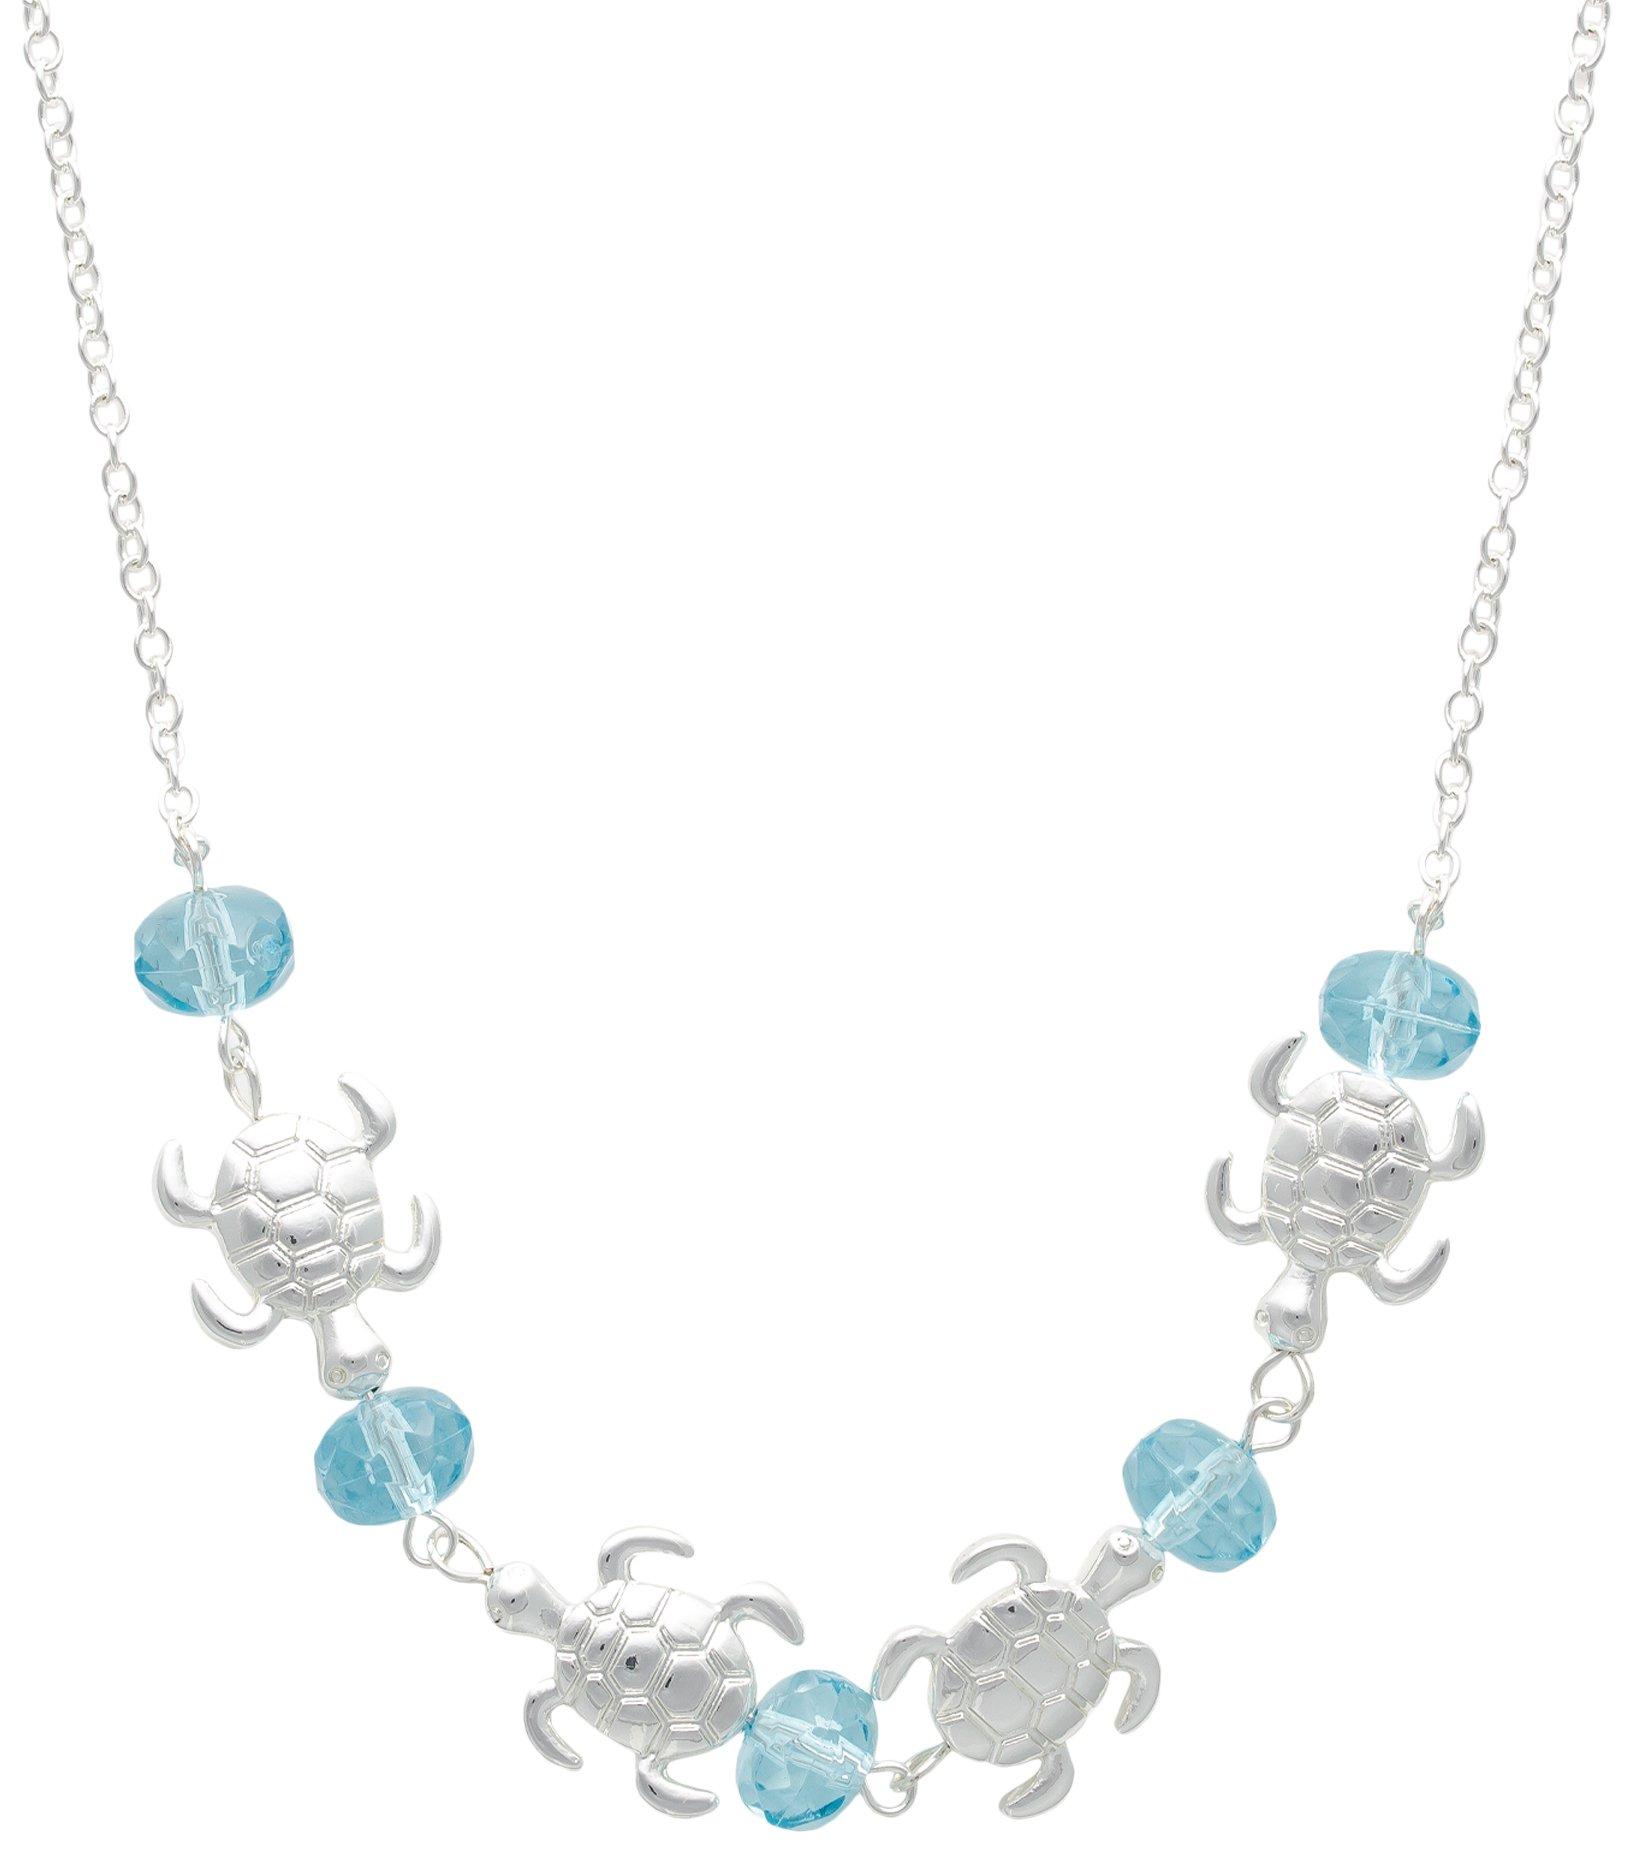 Beach Chic 18 In. Beaded Sea Turtle Frontal Chain Necklace